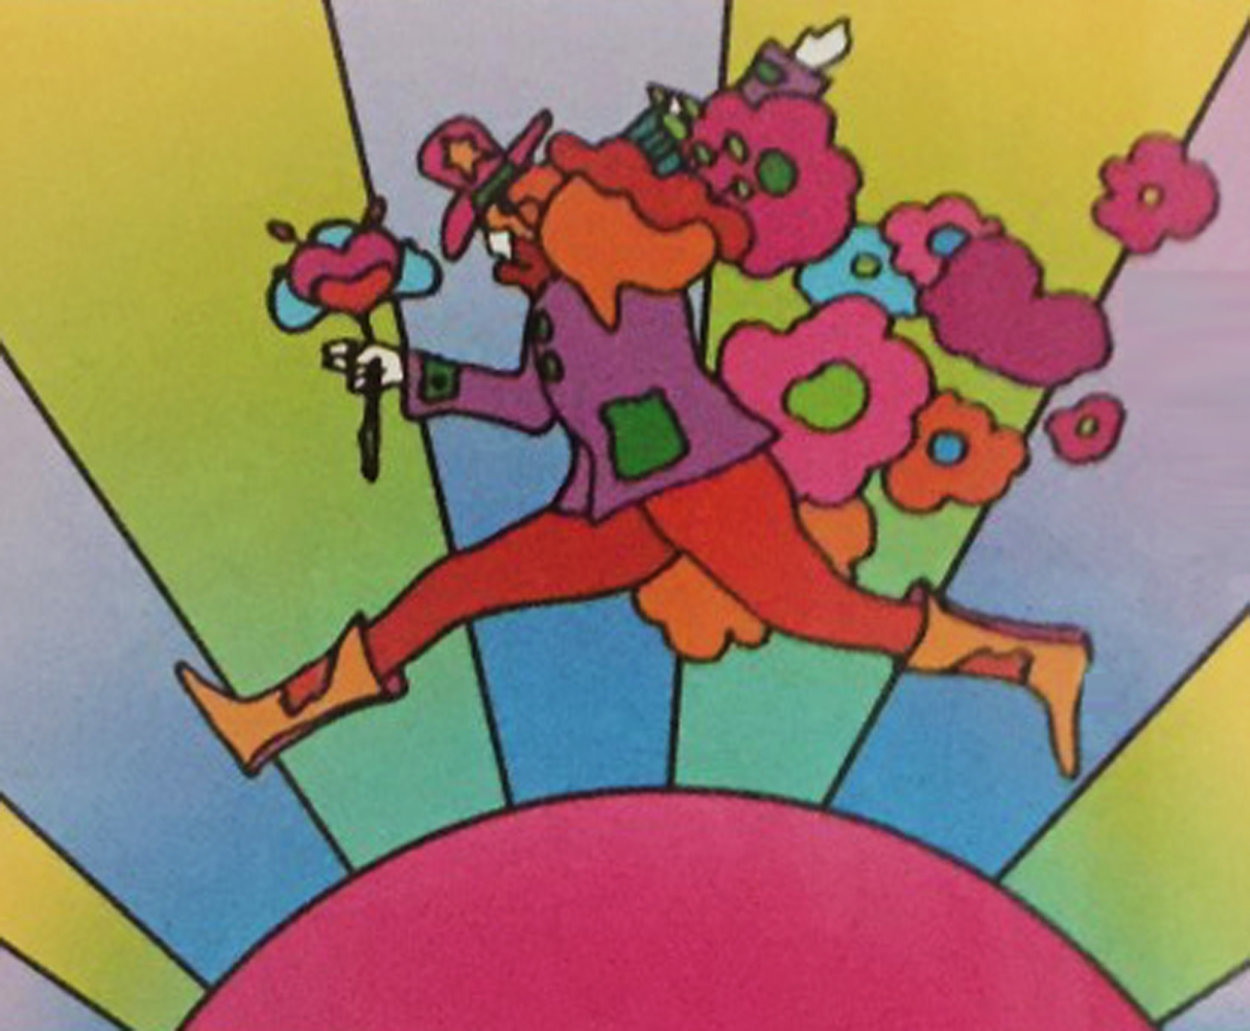 Jumping Man Limited Edition Print by Peter Max